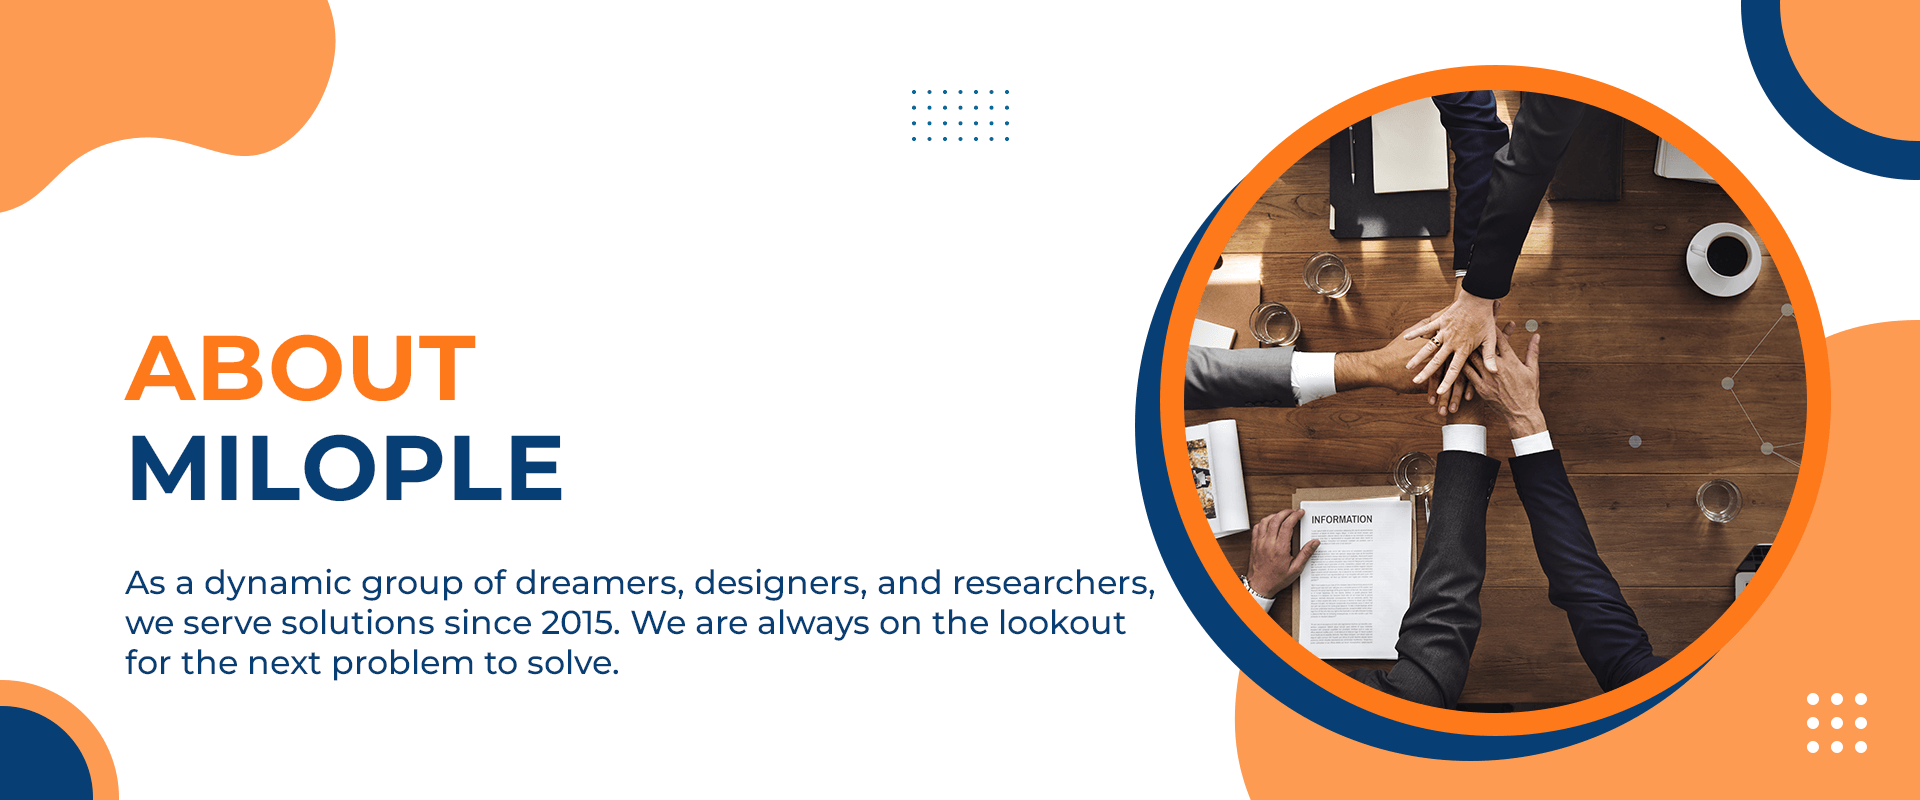 As a dynamic group of dreamers, designers, and researchers, we have been developing comprehensive solutions since 2015. Our growth and success have been constant, and we are always on the lookout for the next problem to solve.